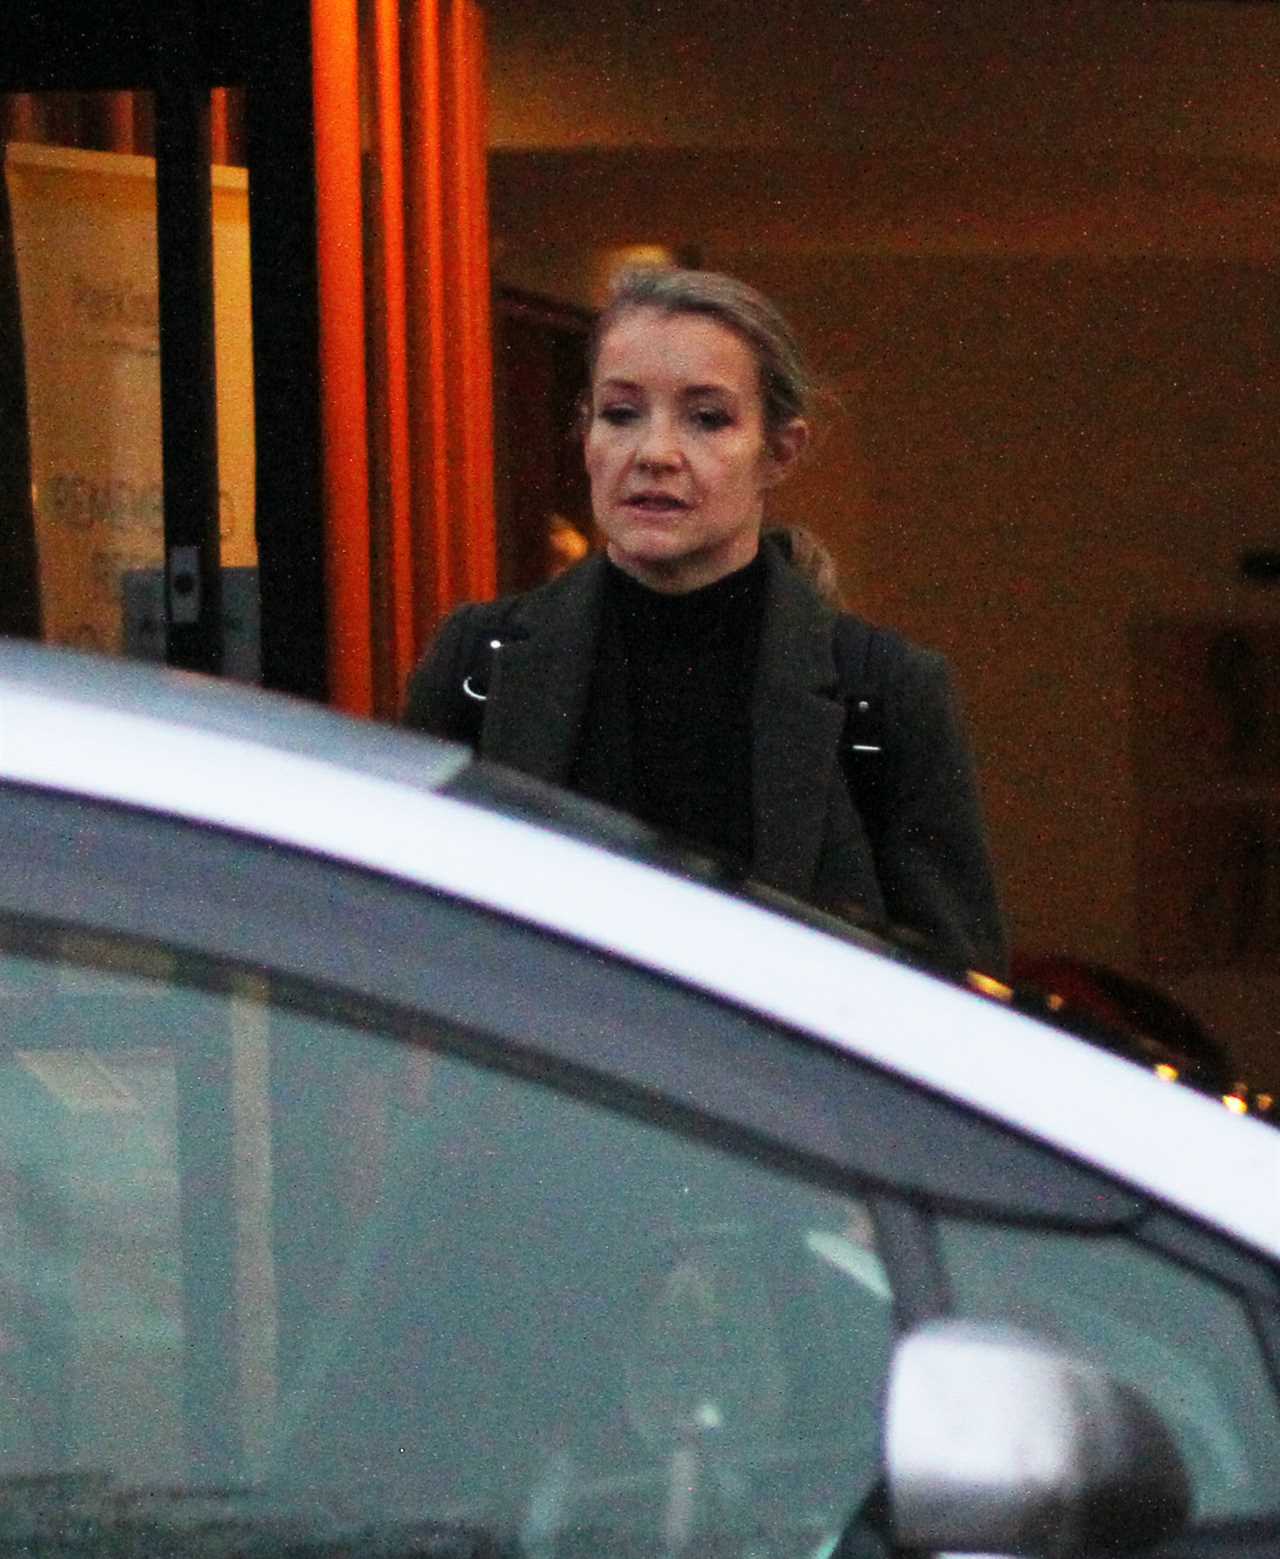 Helen Skelton looks downcast as she’s seen for the first time since losing Strictly crown to Hamza Yassin